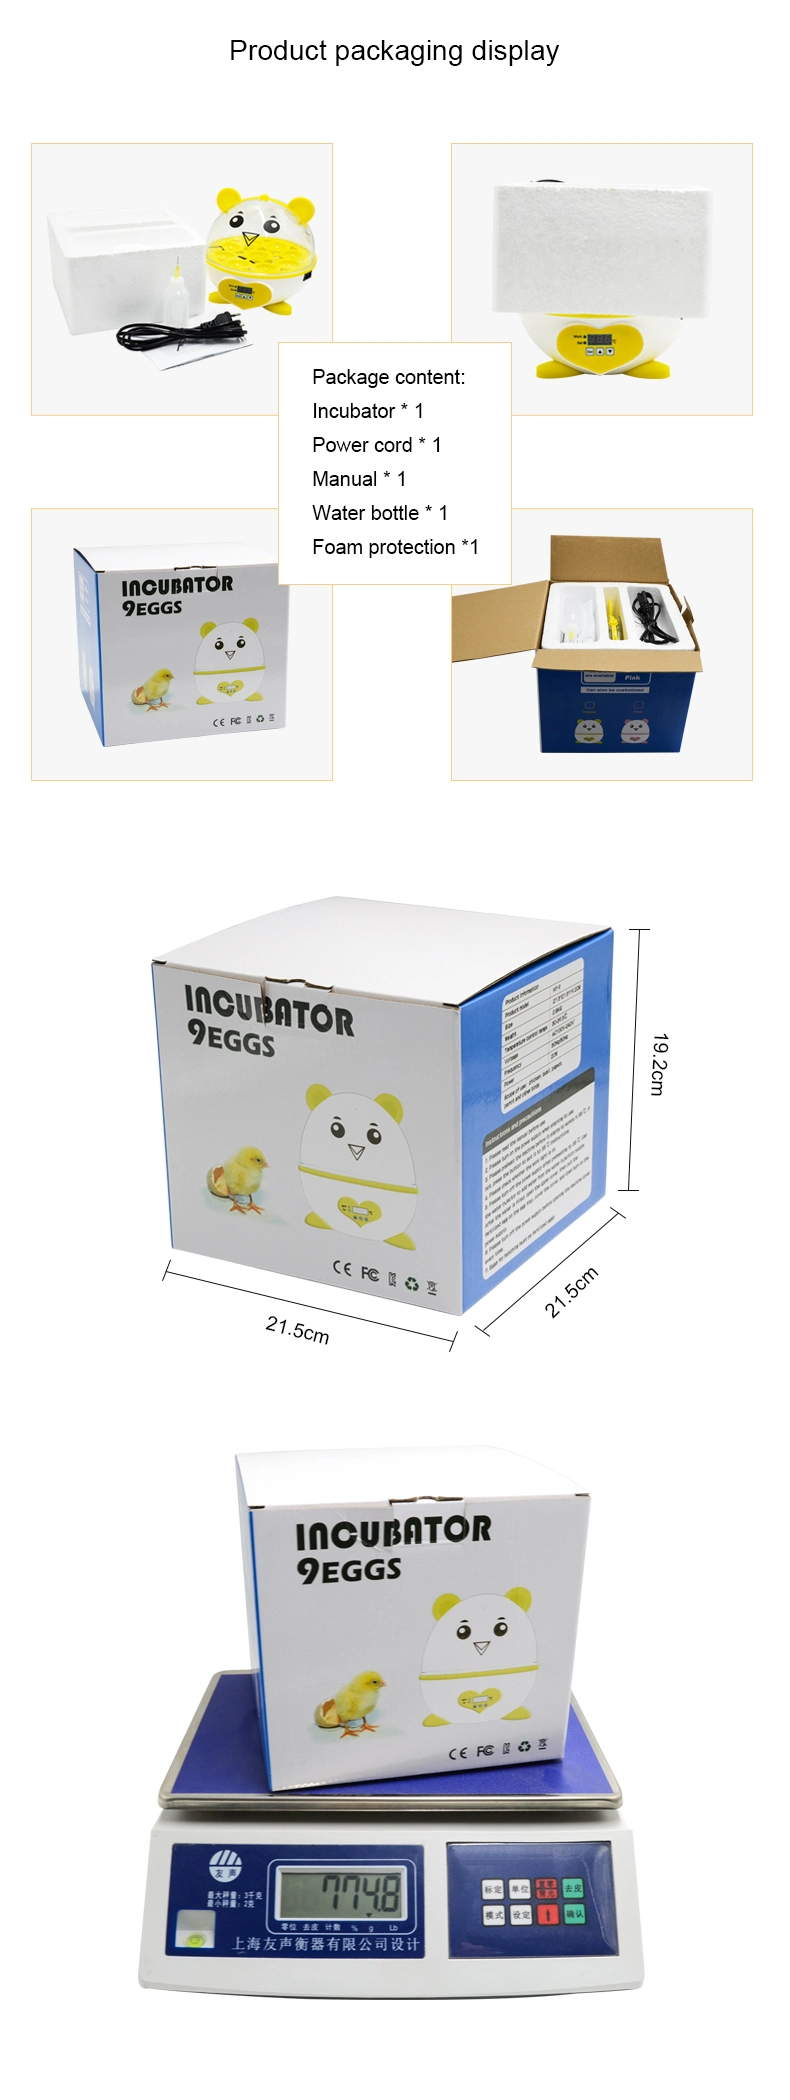 The Hot Sale High Hatching Rate Ht-9 Hatching Machine Egg Incubator